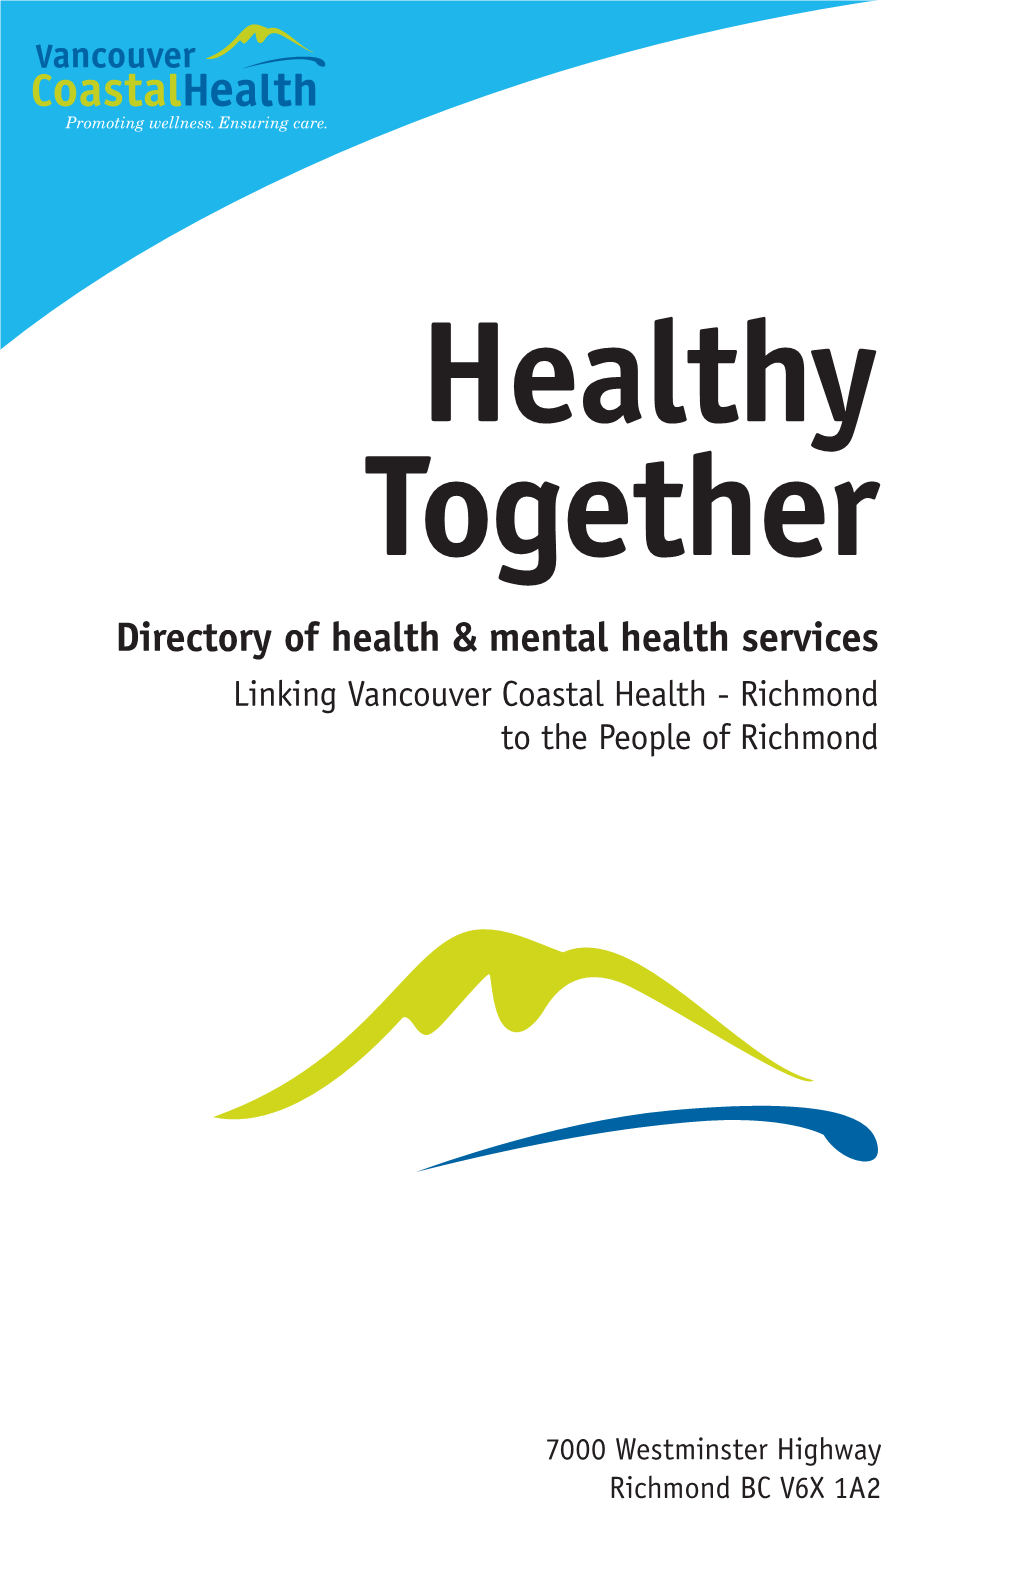 Healthy Together Directory of Health & Mental Health Services Linking Vancouver Coastal Health - Richmond to the People of Richmond